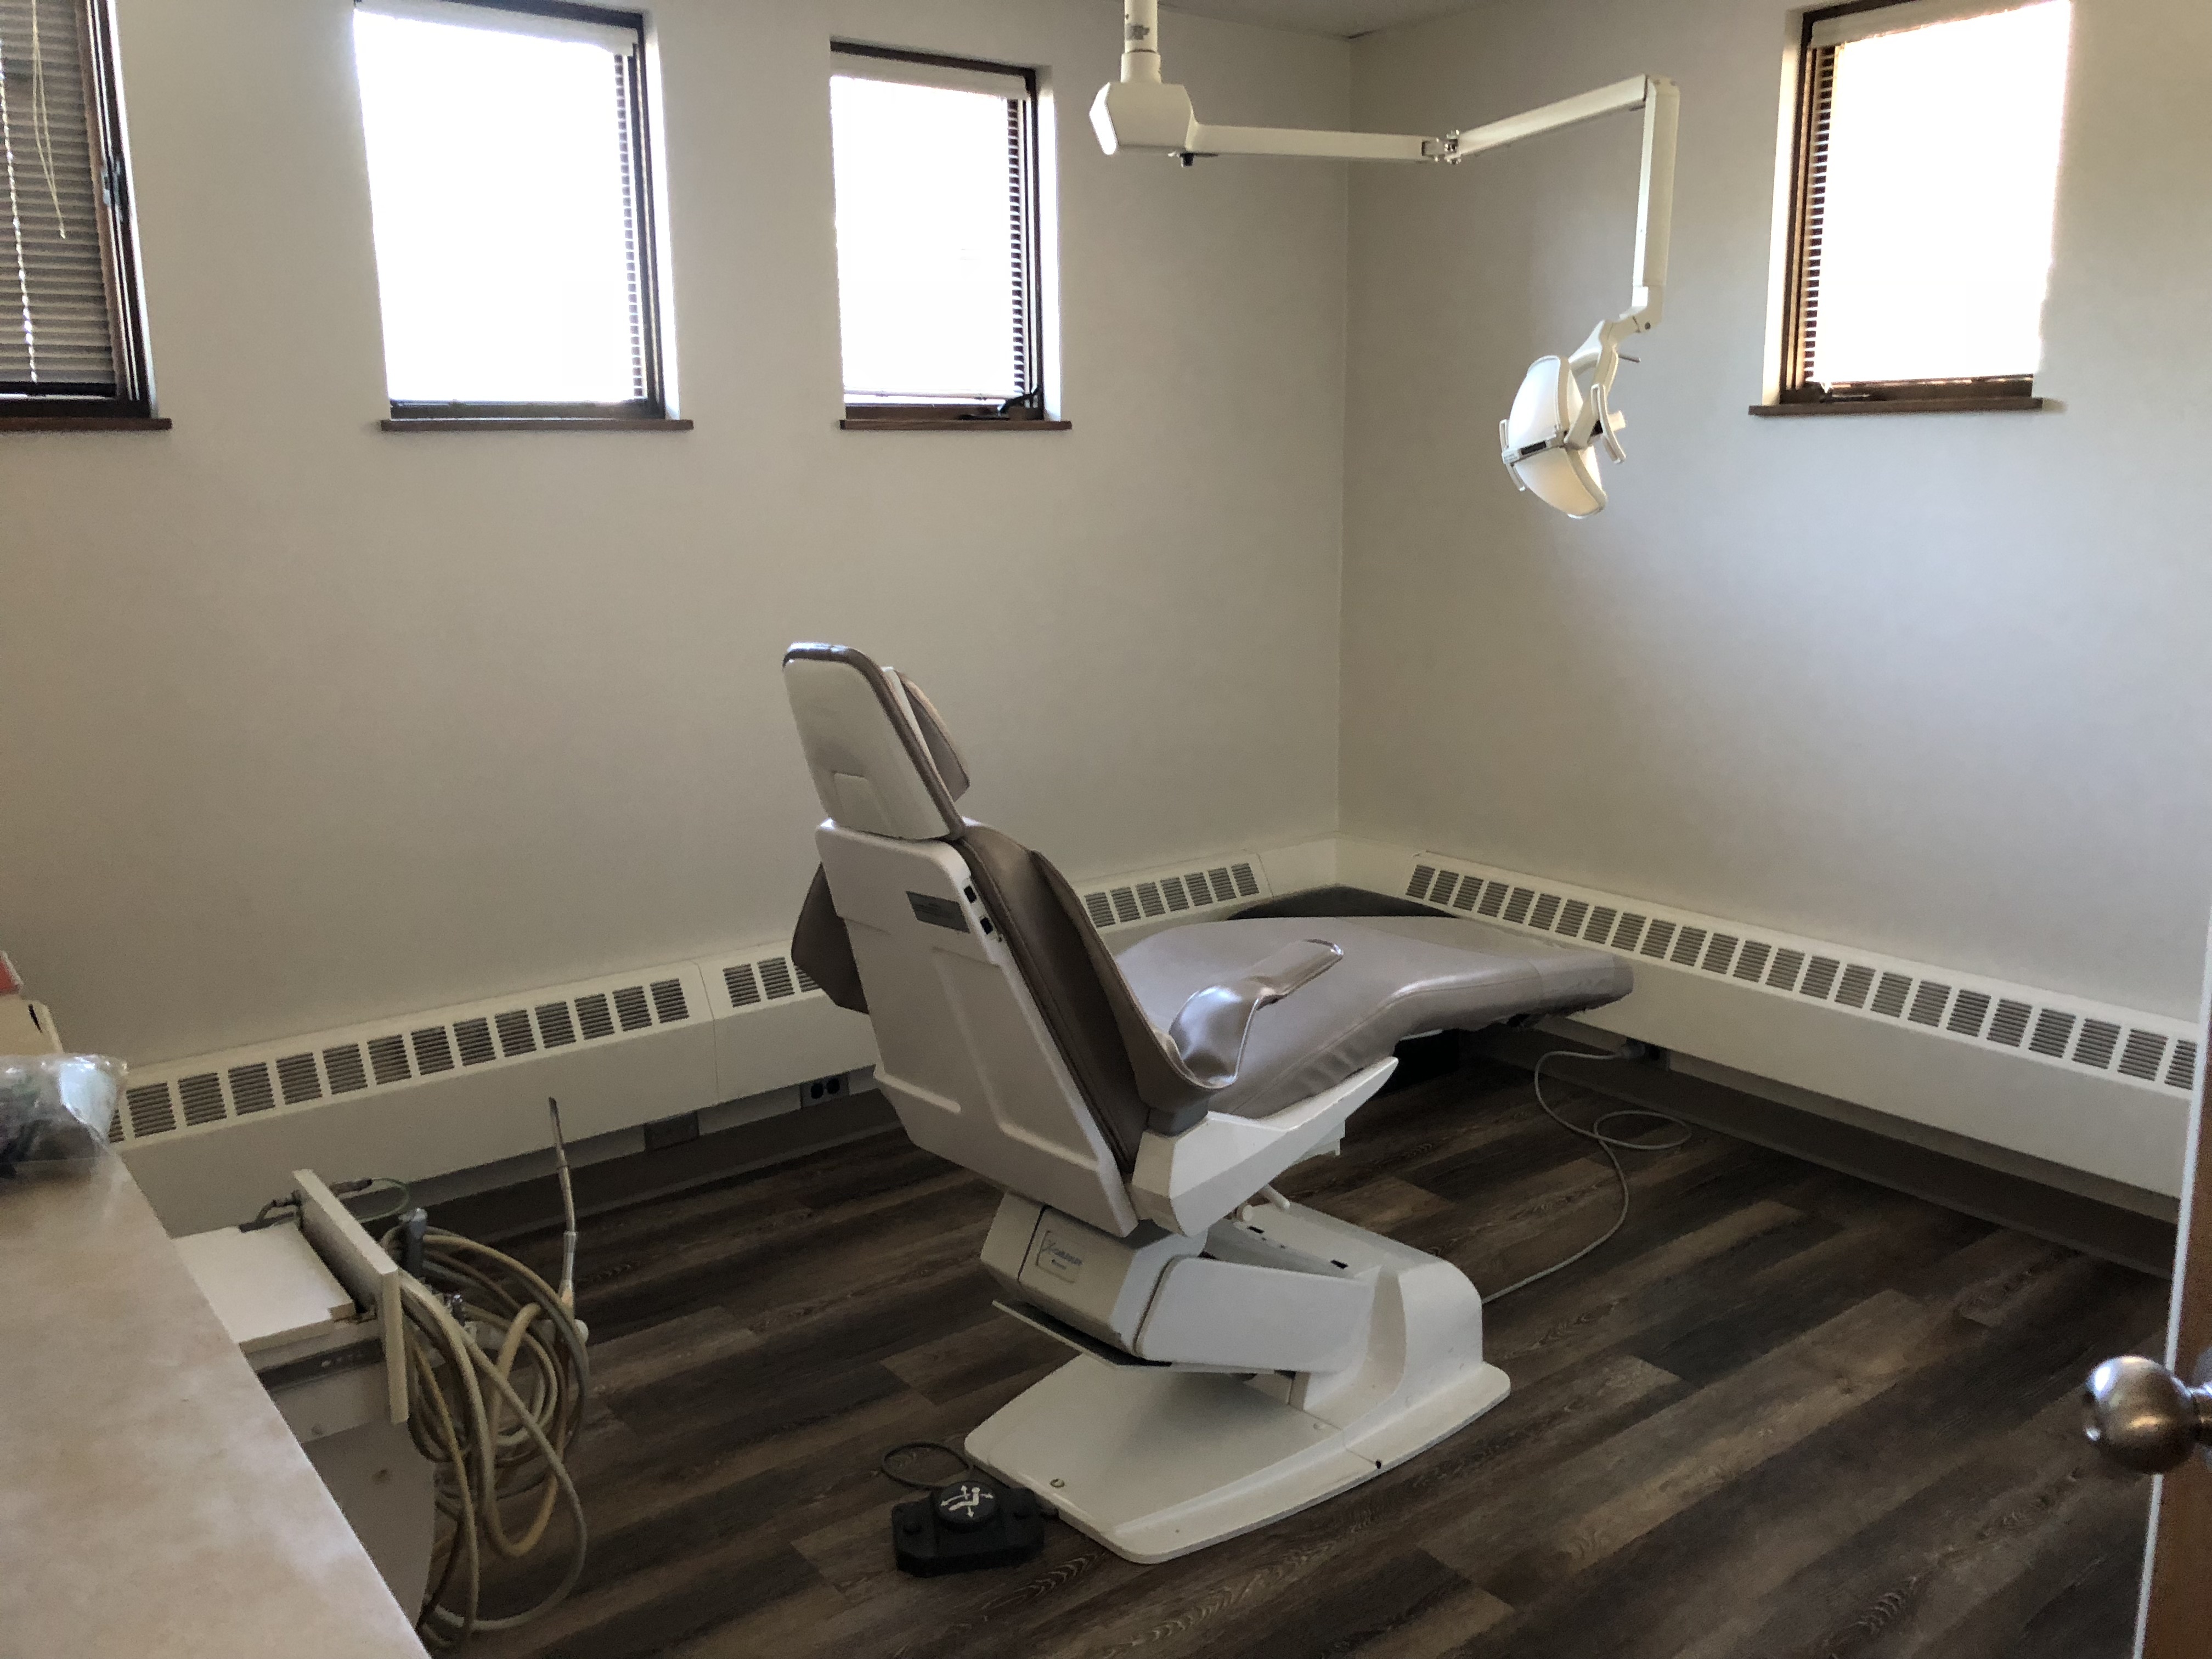 Newly listed: 2,384 S.F. TURNKEY MEDICAL/DENTAL SUITE